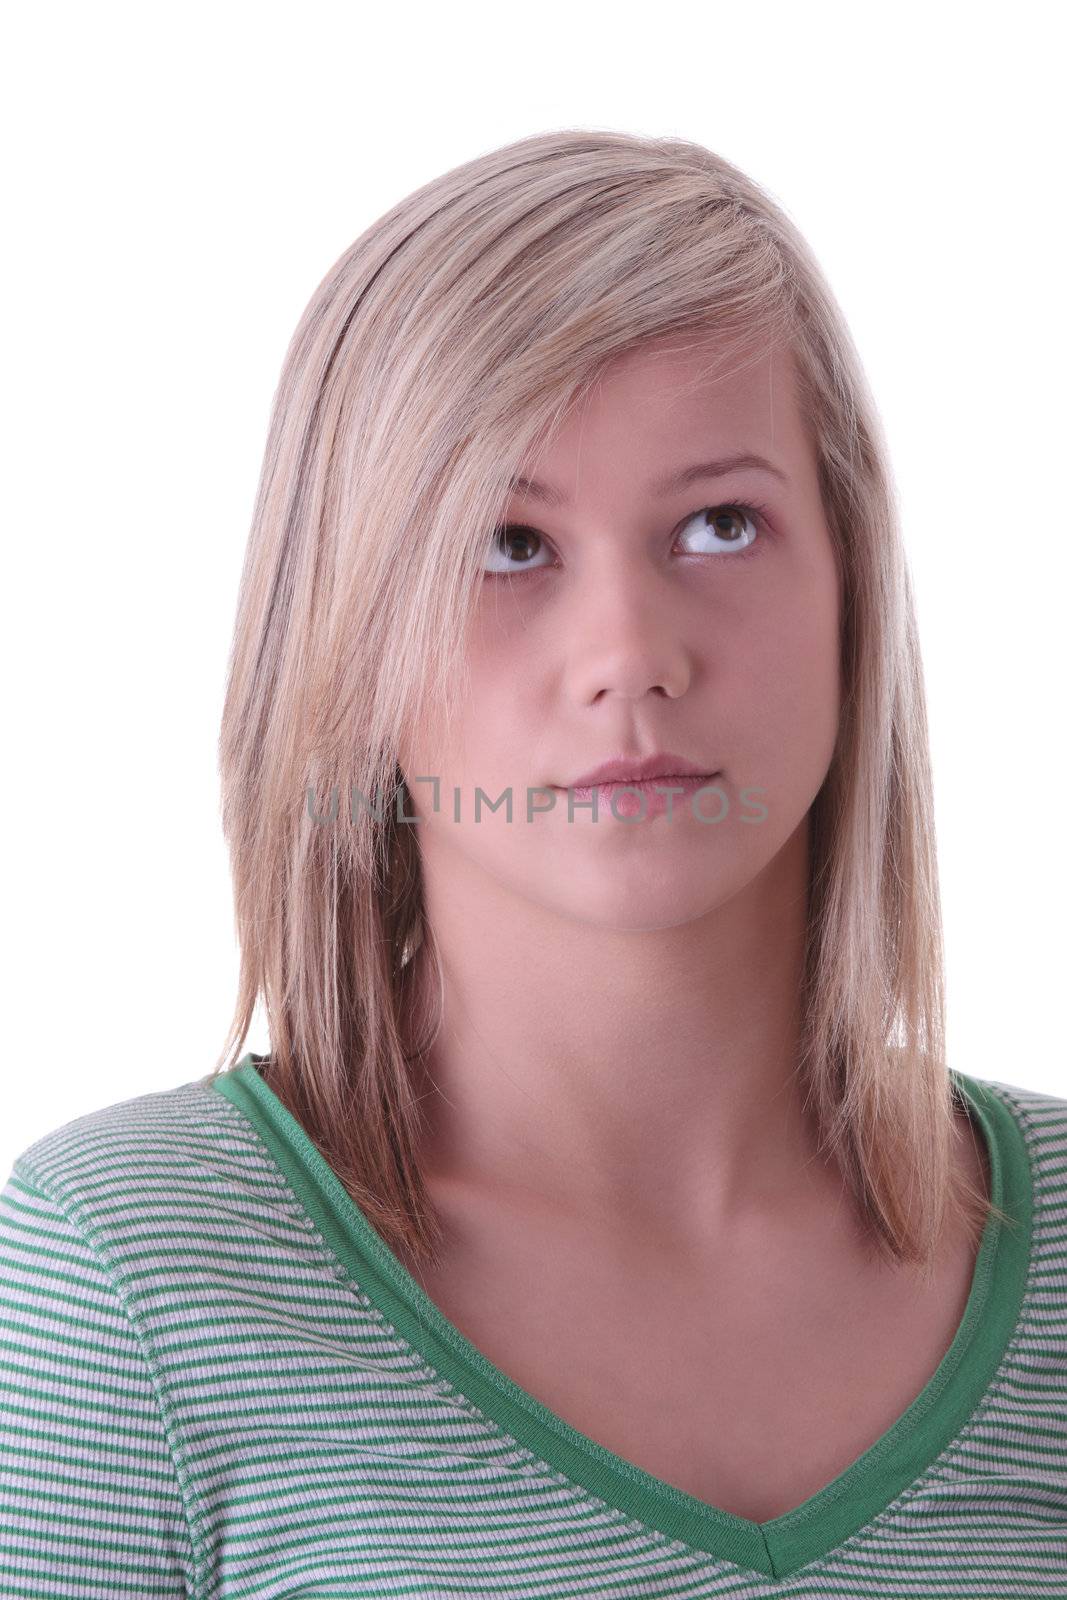 Teen blonde girl (student) portrait isolated on white background